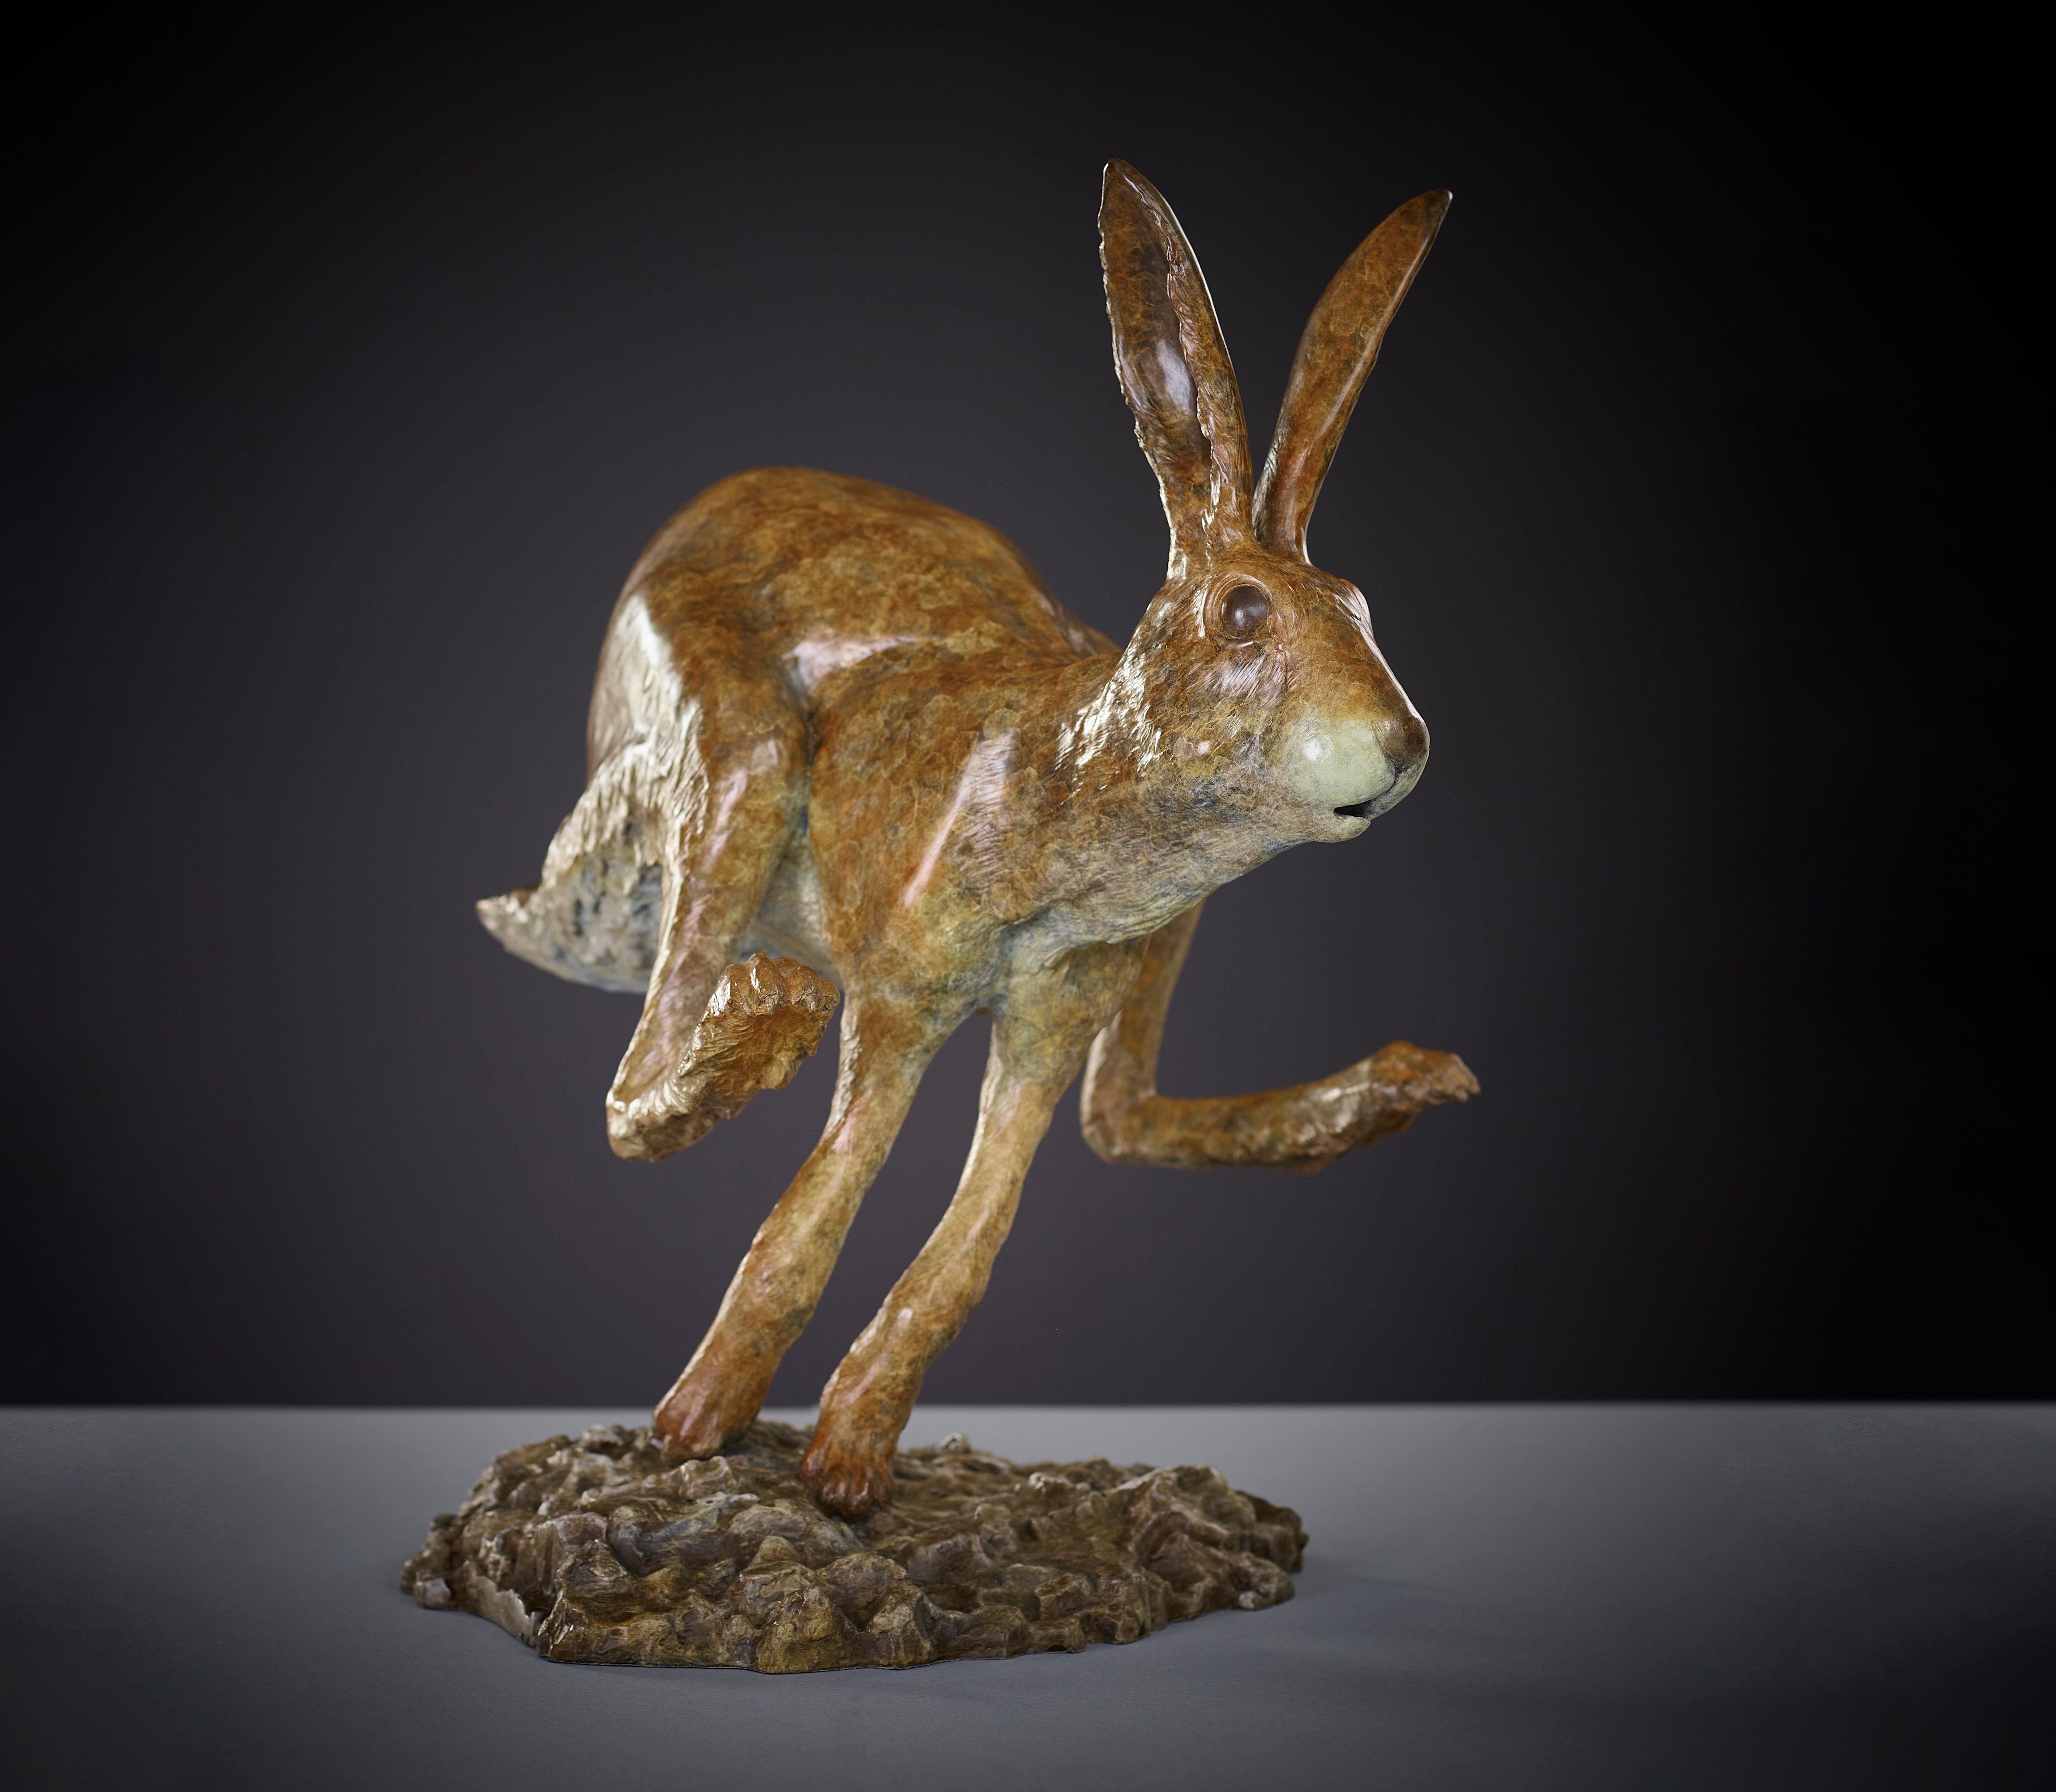 Contemporary Bronze Animal Sculpture of a Hare 'Jumping Jack' by Tobias Martin